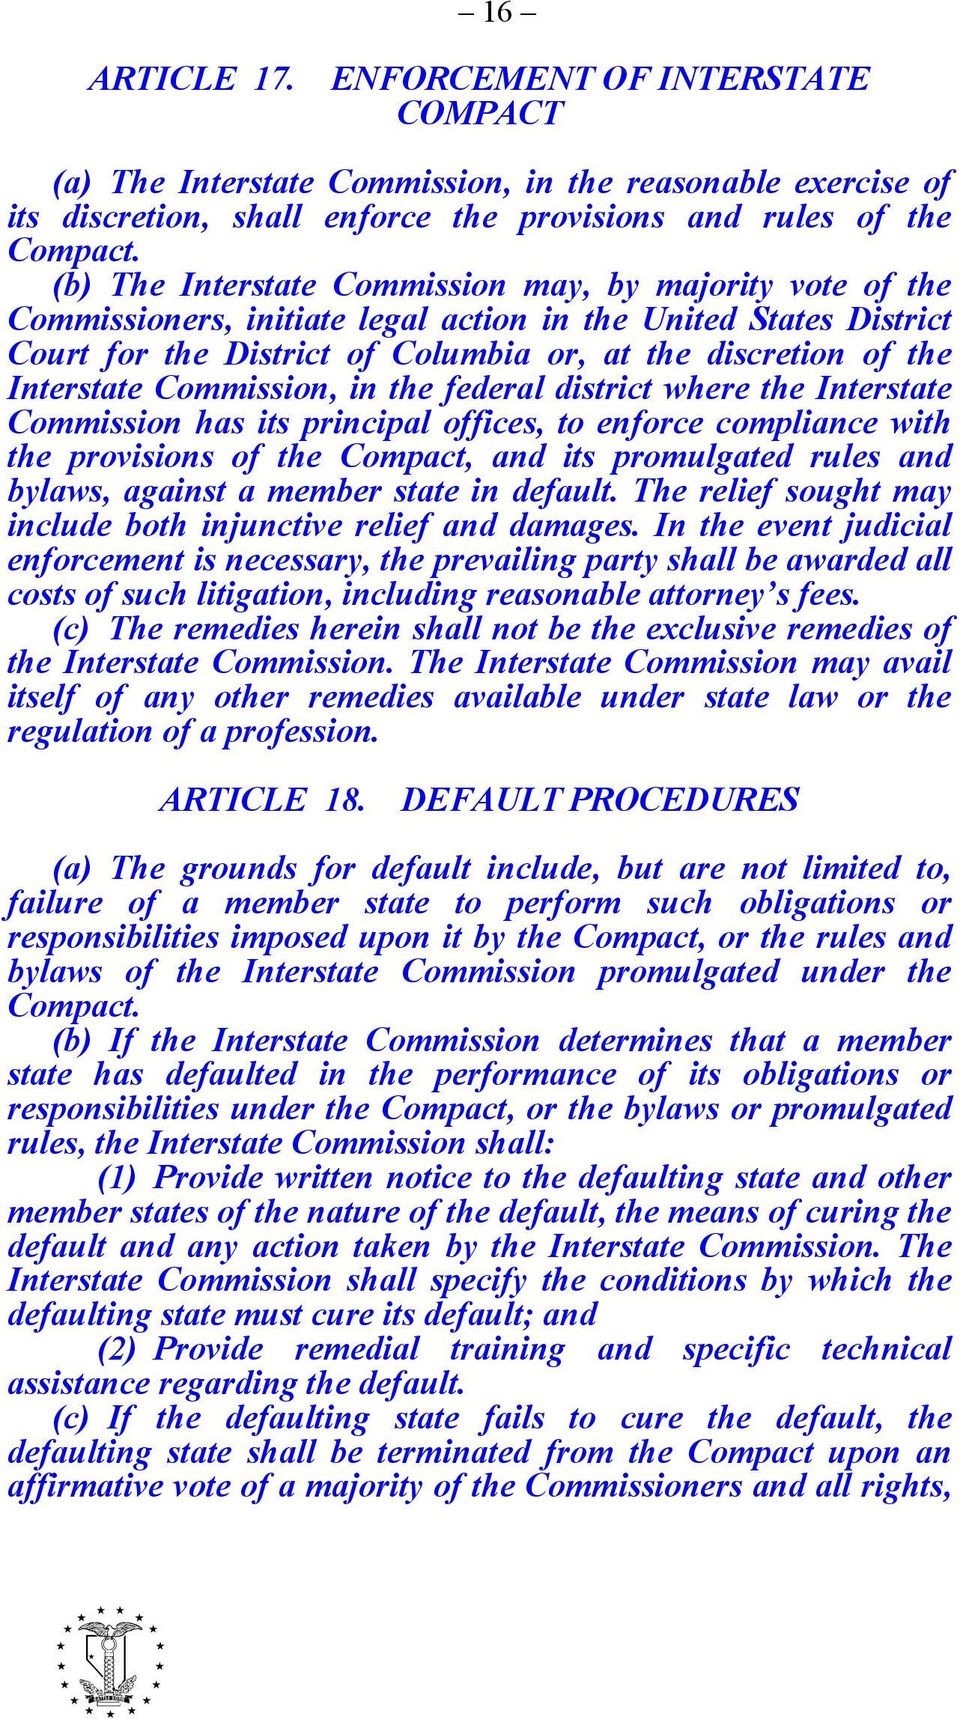 Interstate Commission, in the federal district where the Interstate Commission has its principal offices, to enforce compliance with the provisions of the Compact, and its promulgated rules and